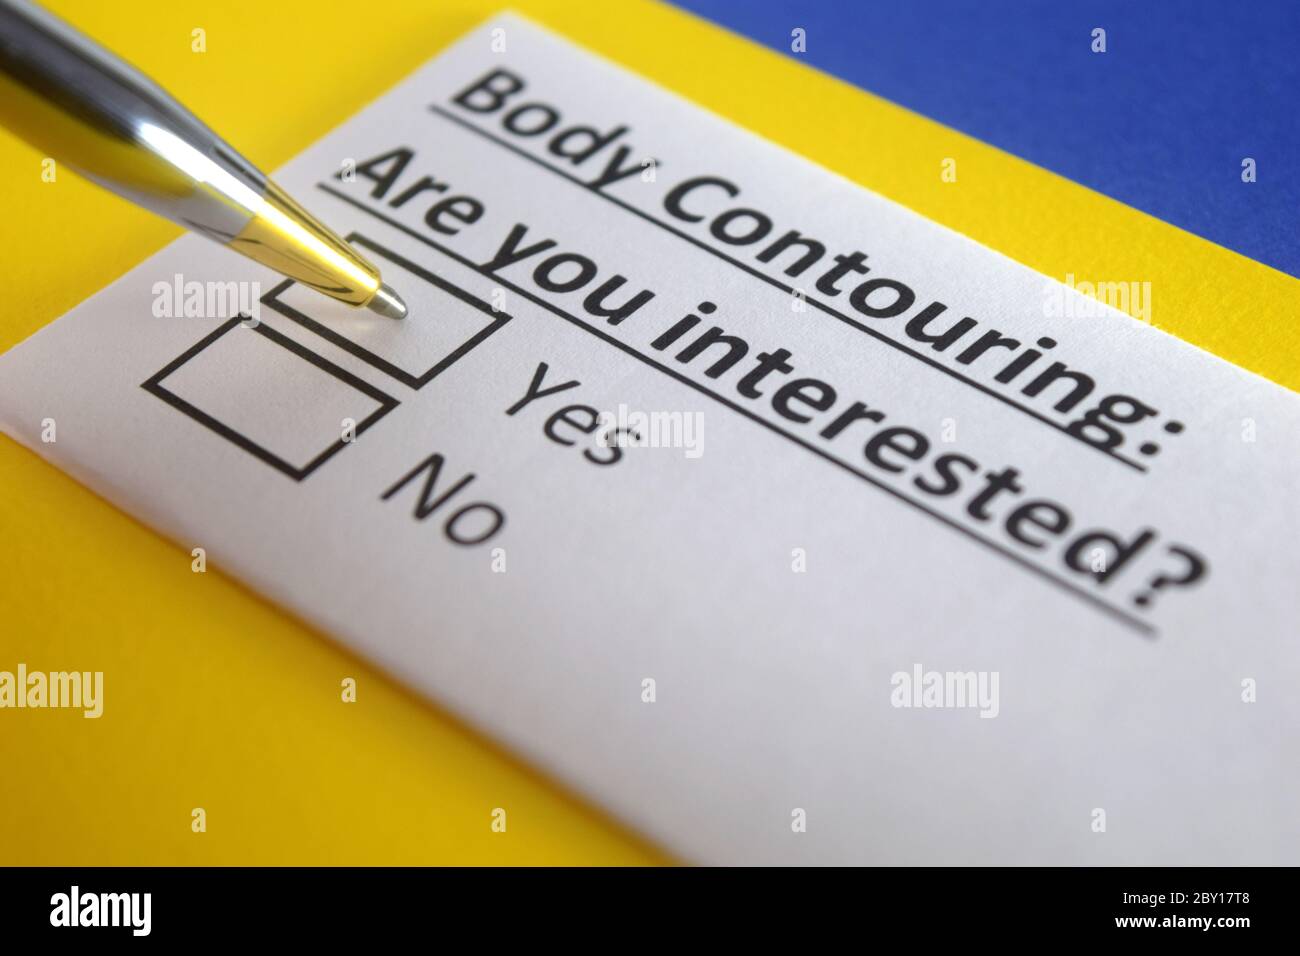 One person is answering question about body contouring. Stock Photo